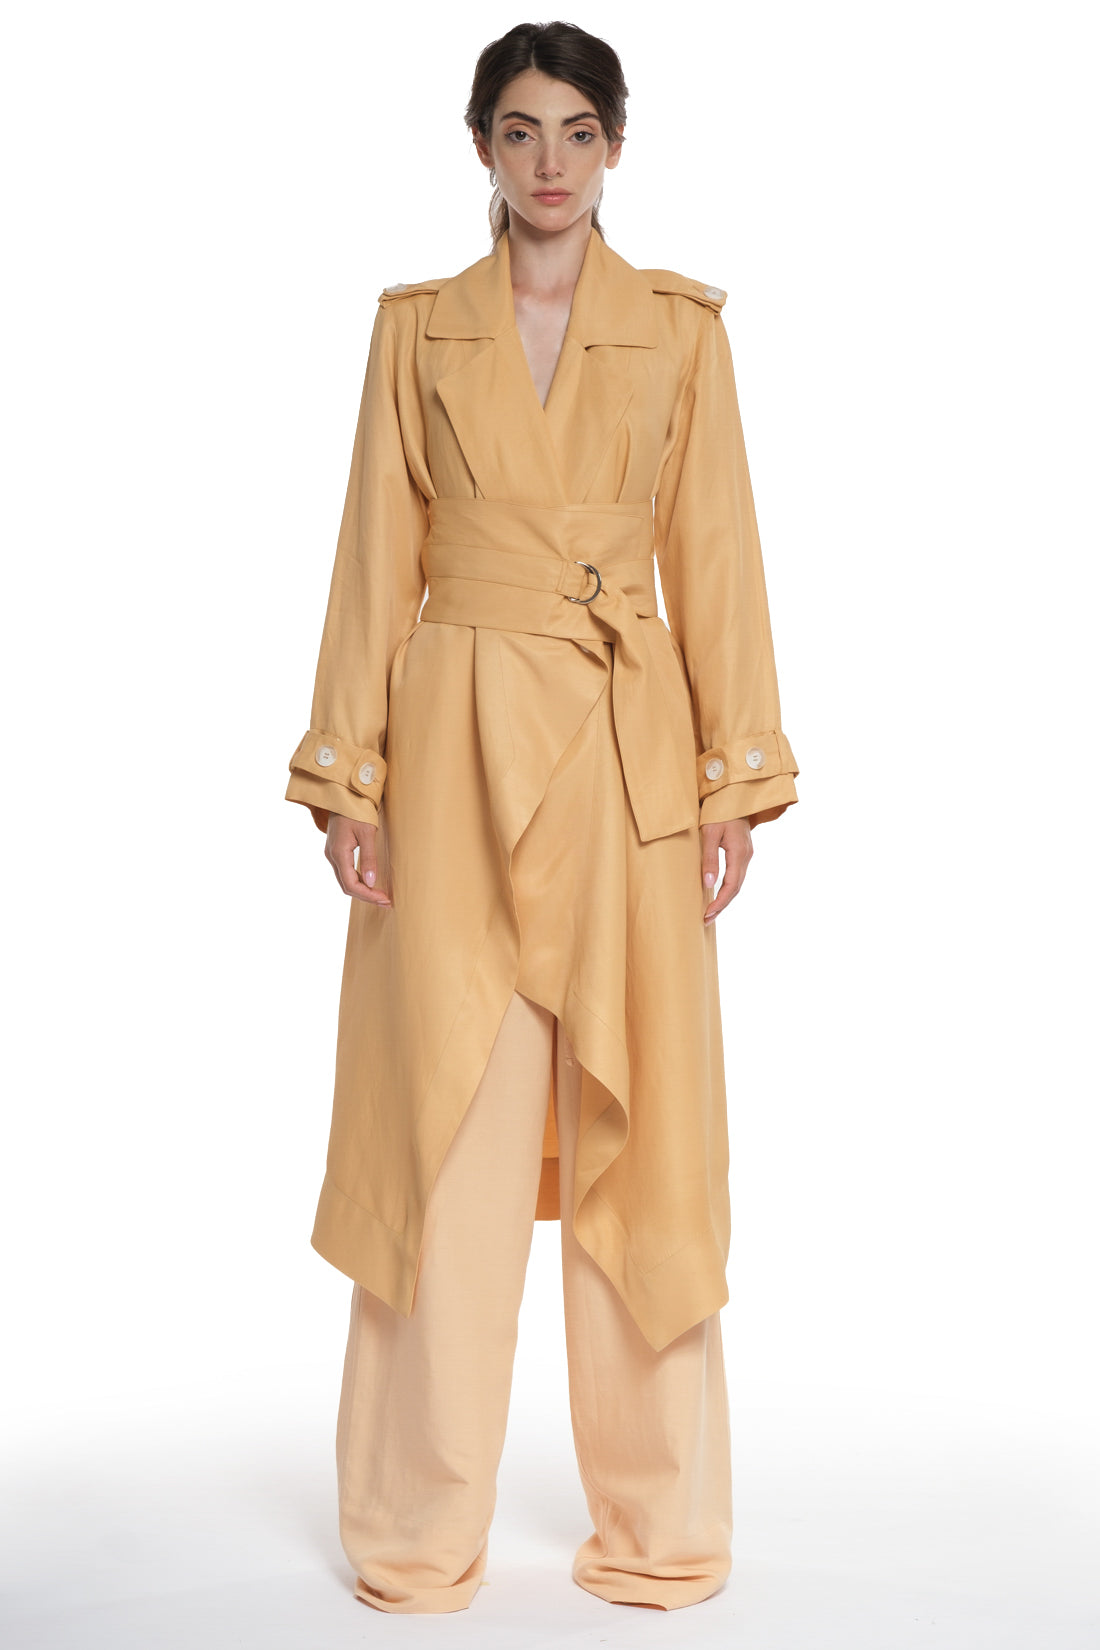 LONG TRENCH DRESS WITH BIG BELT IN THE SAME FABRIC, OPEN COLLAR, OVERLAPPING IN THE FRONT